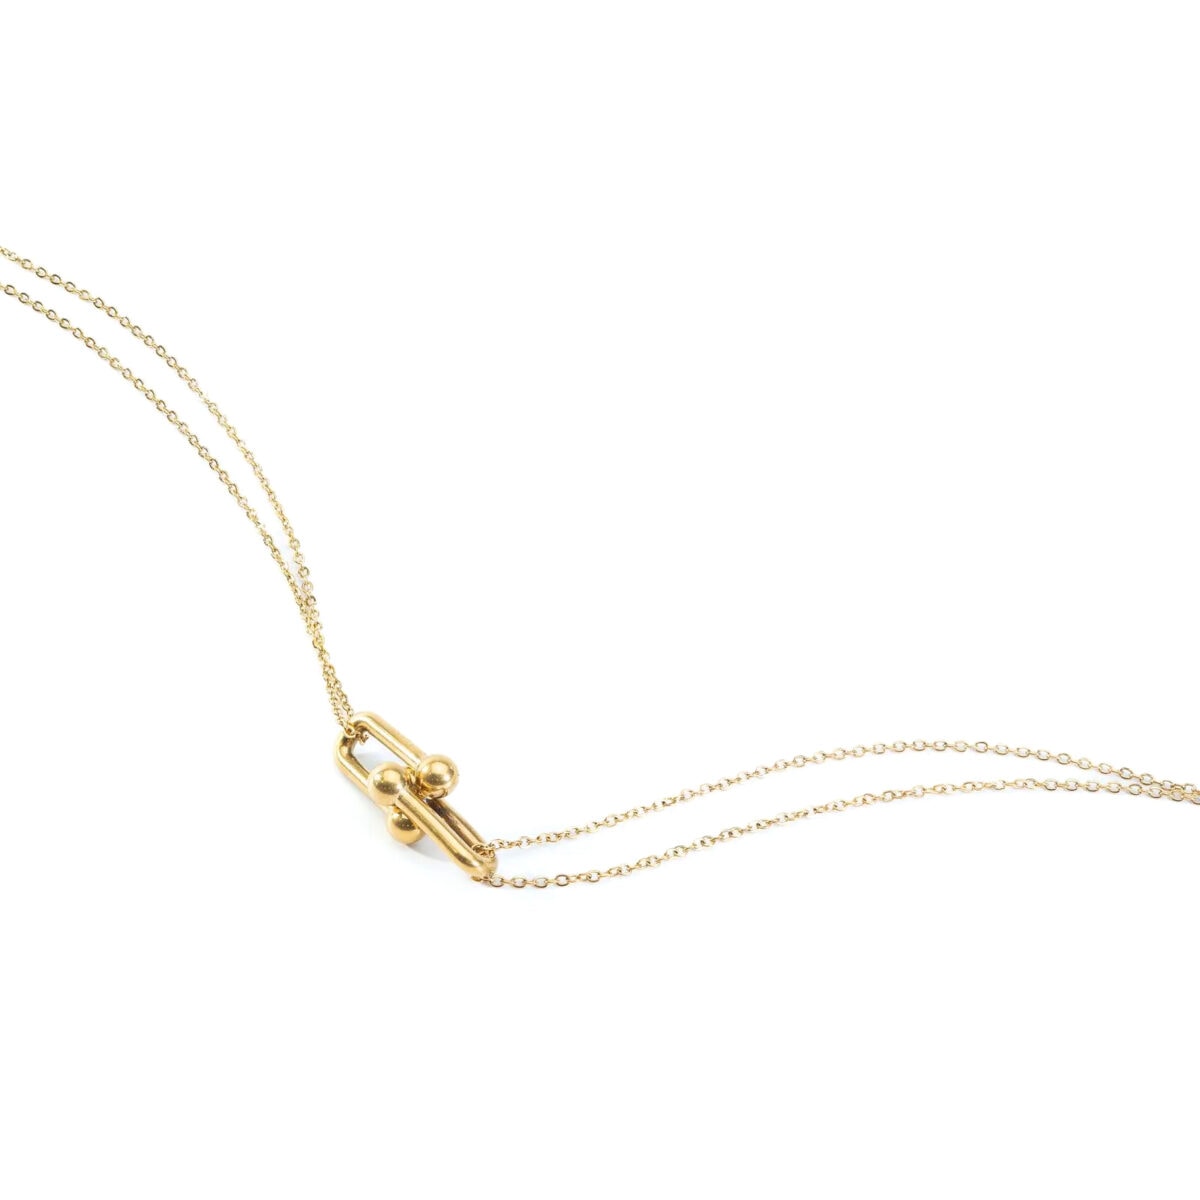 https://m.clubbella.co/product/bold-gold-link-necklace/ Bold Gold Link Necklace (1)